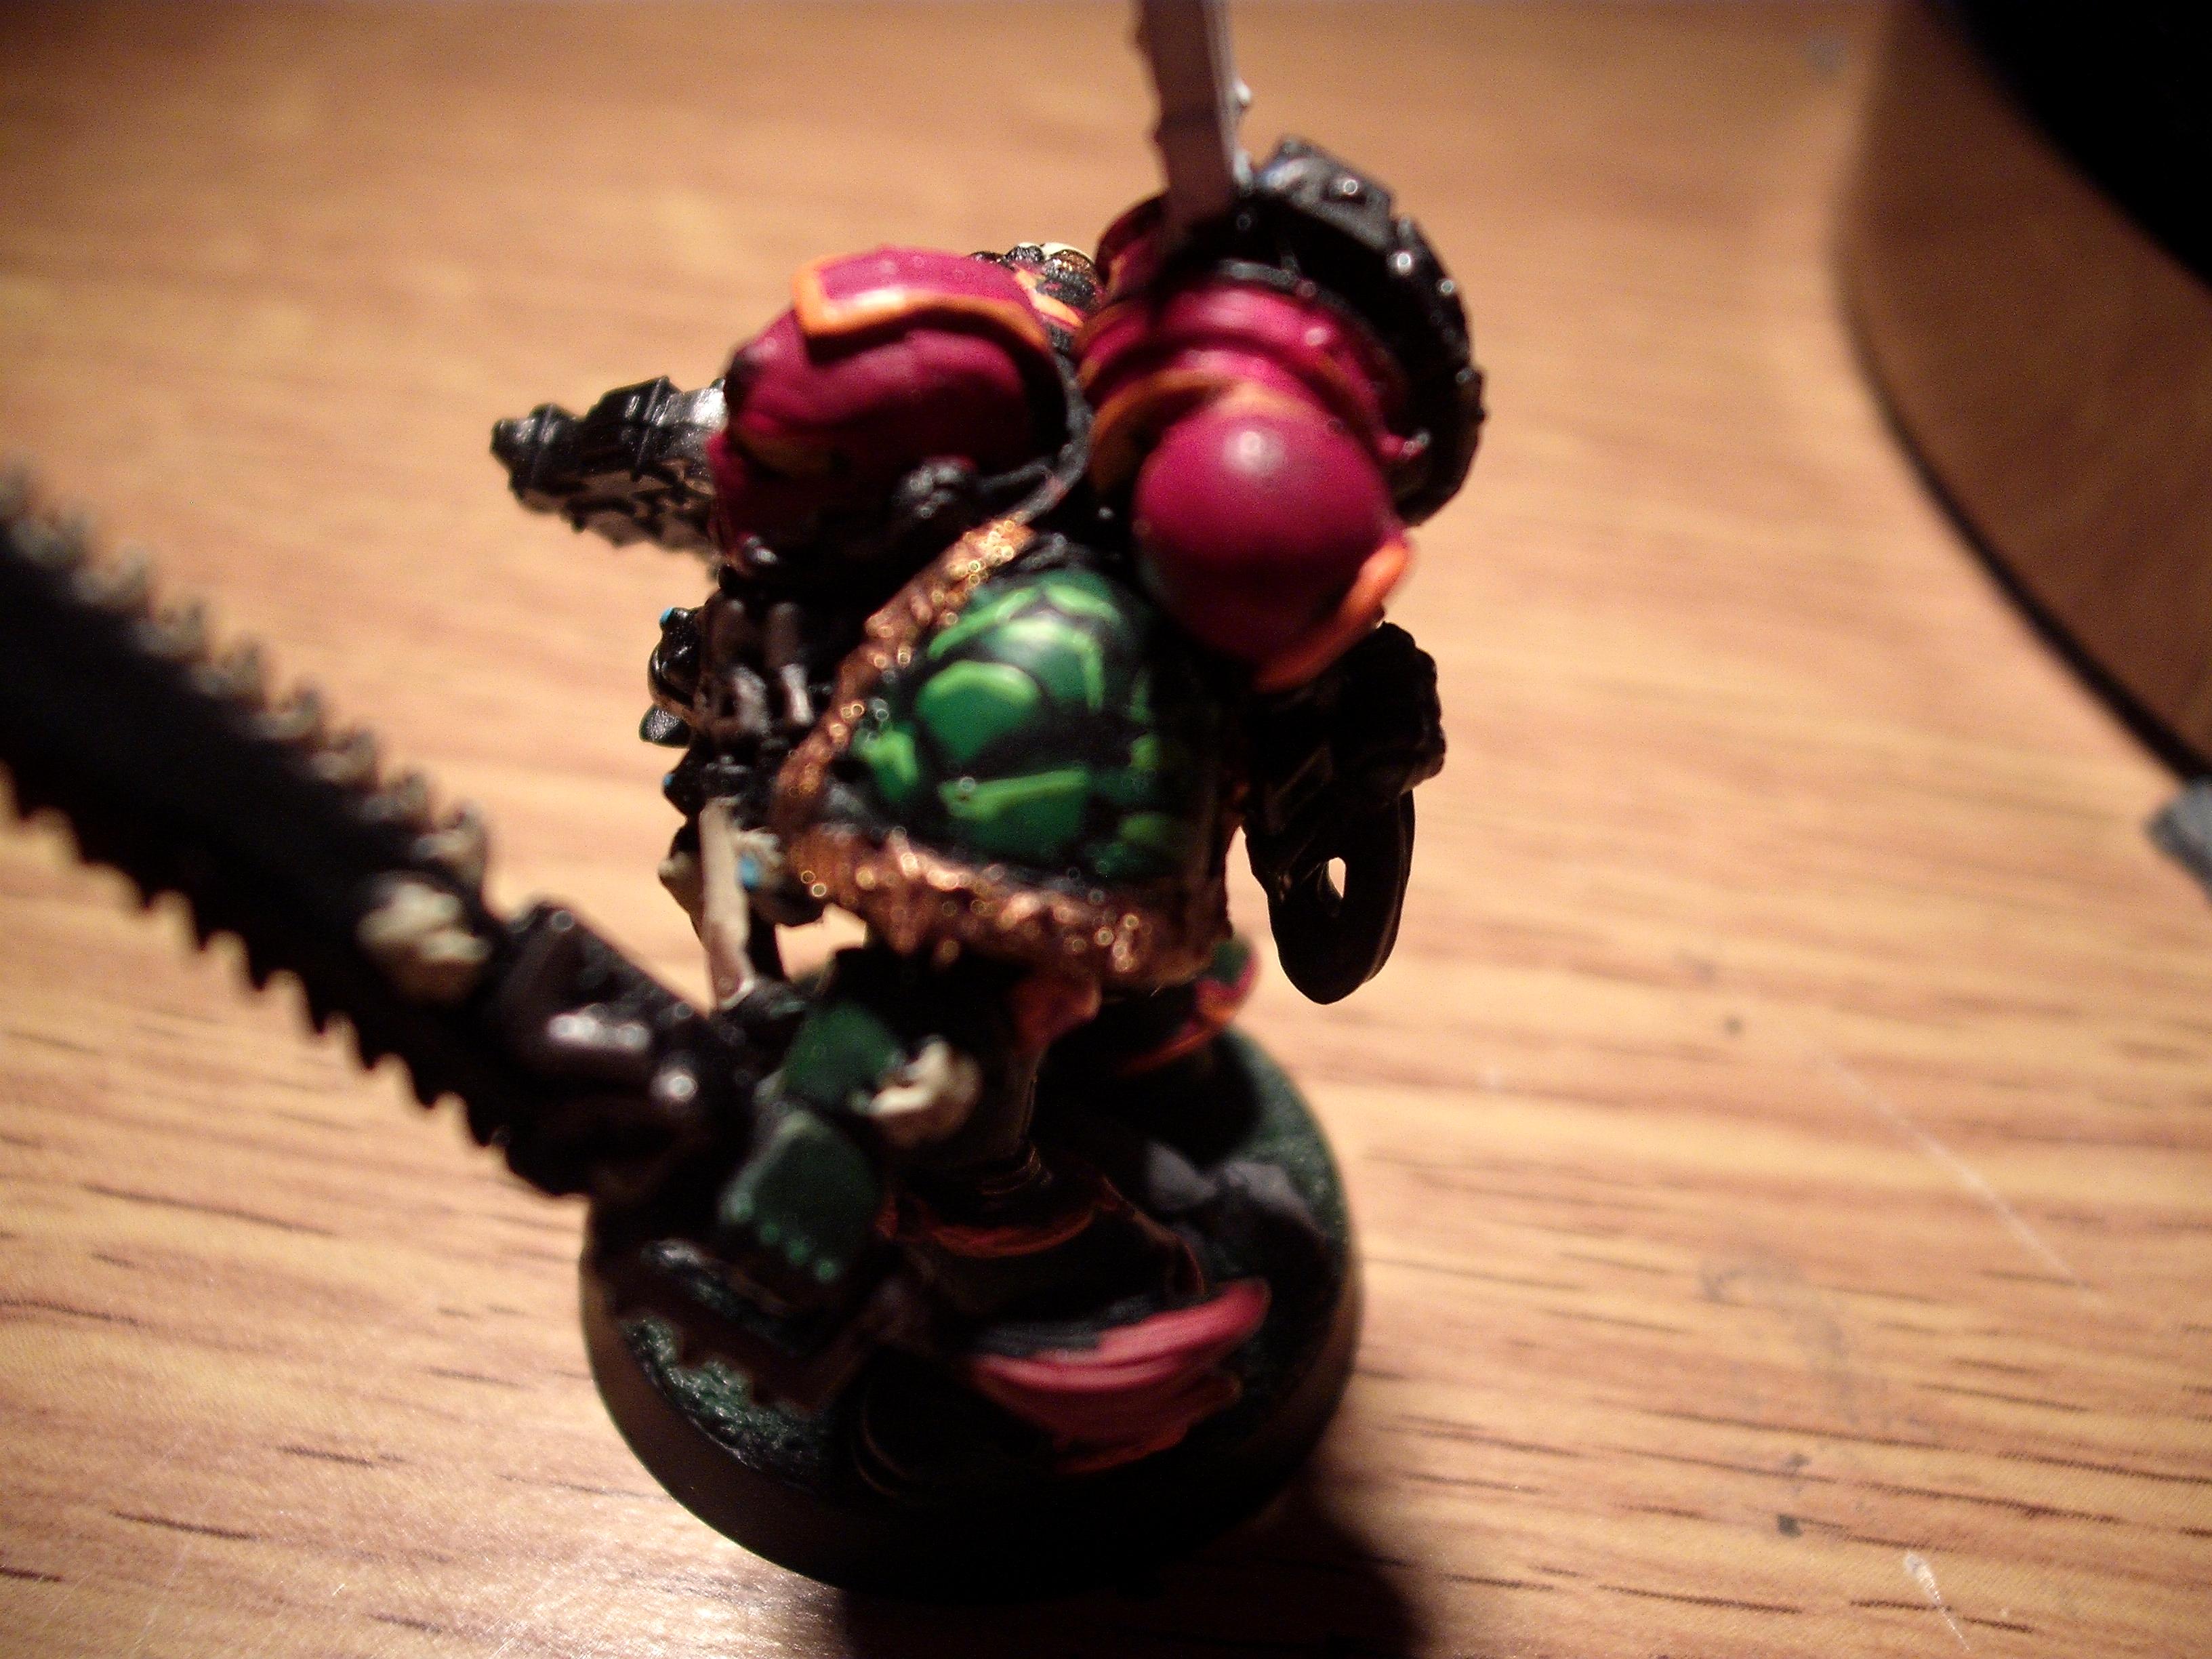 Chainsword, Counts As, Green, Pack Leader, Raptors, Scales, Sergeant, Side View, Space Marines